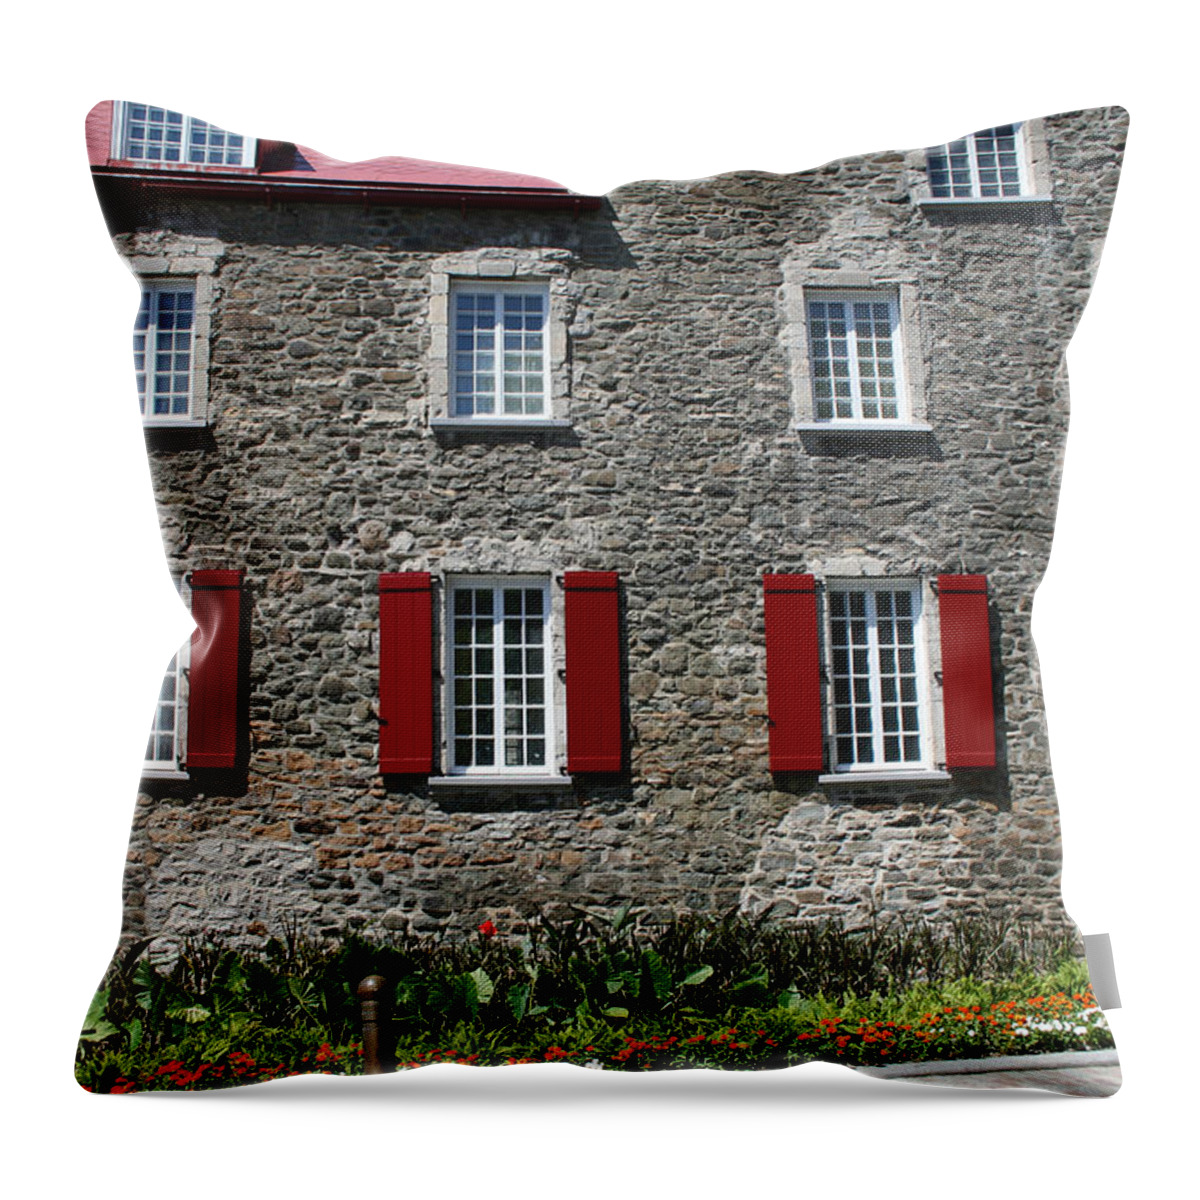 Built Structure Throw Pillow featuring the photograph Canada Quebec City by Shunyufan